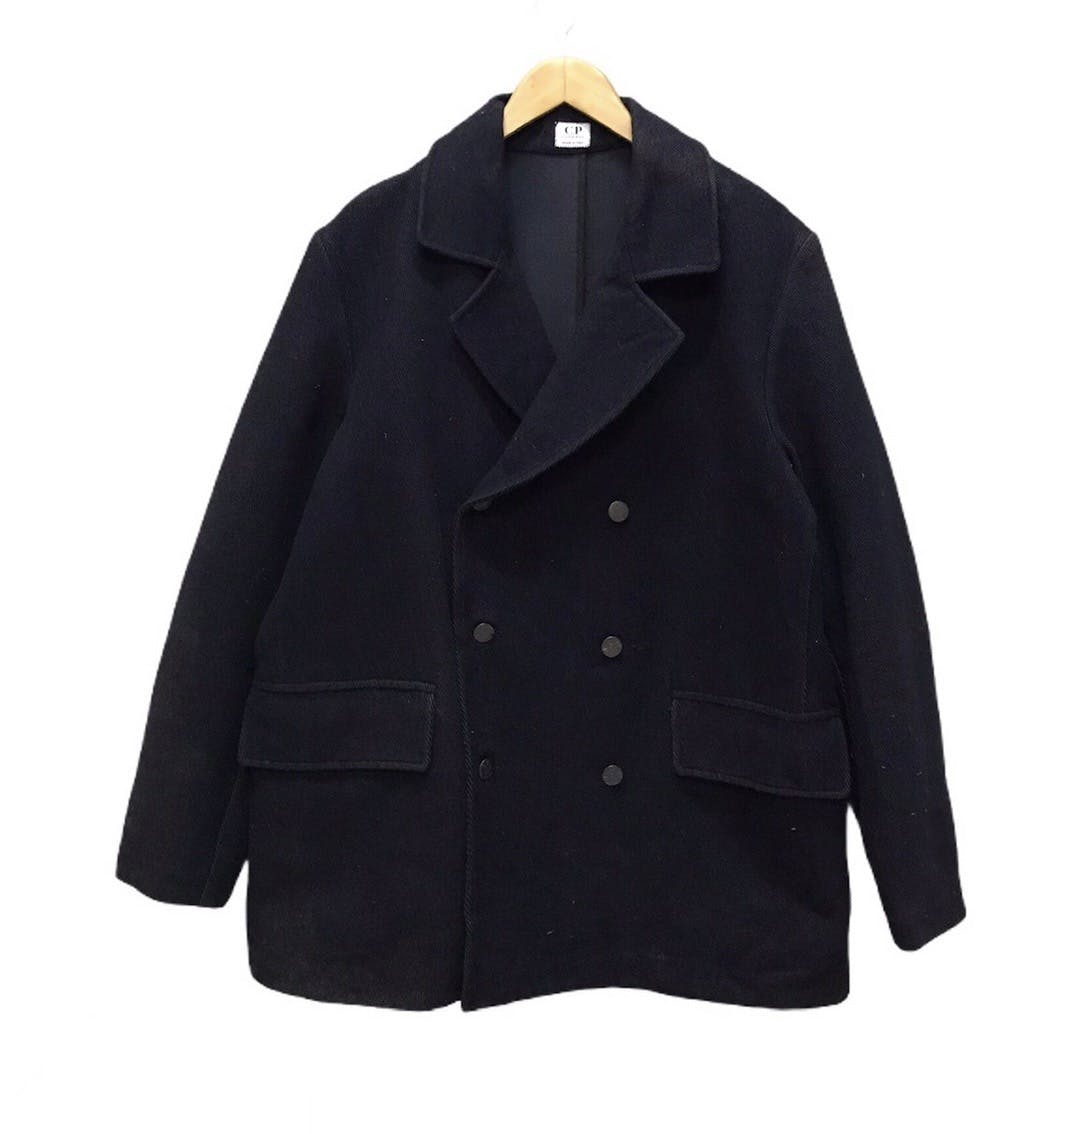 Great CP Company double-breasted coat - 1